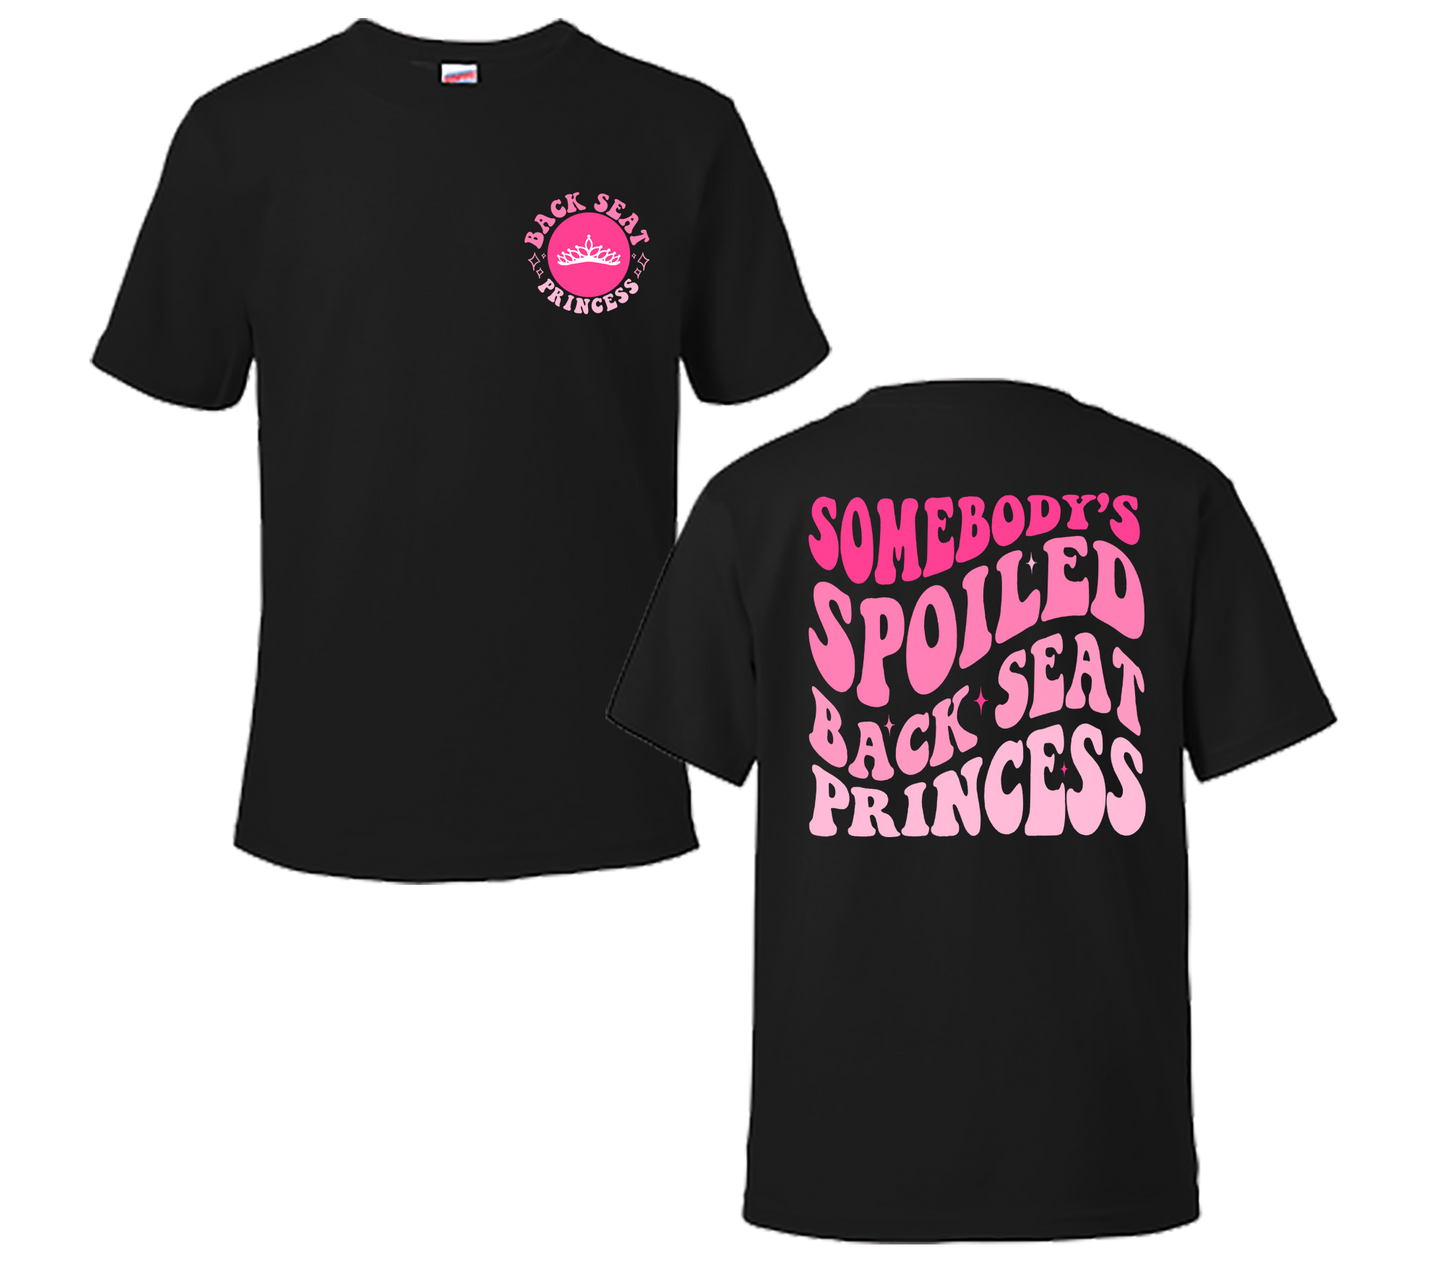 Somebody's Spoiled Back Seat Princess Graphic Youth and Toddler Tshirt